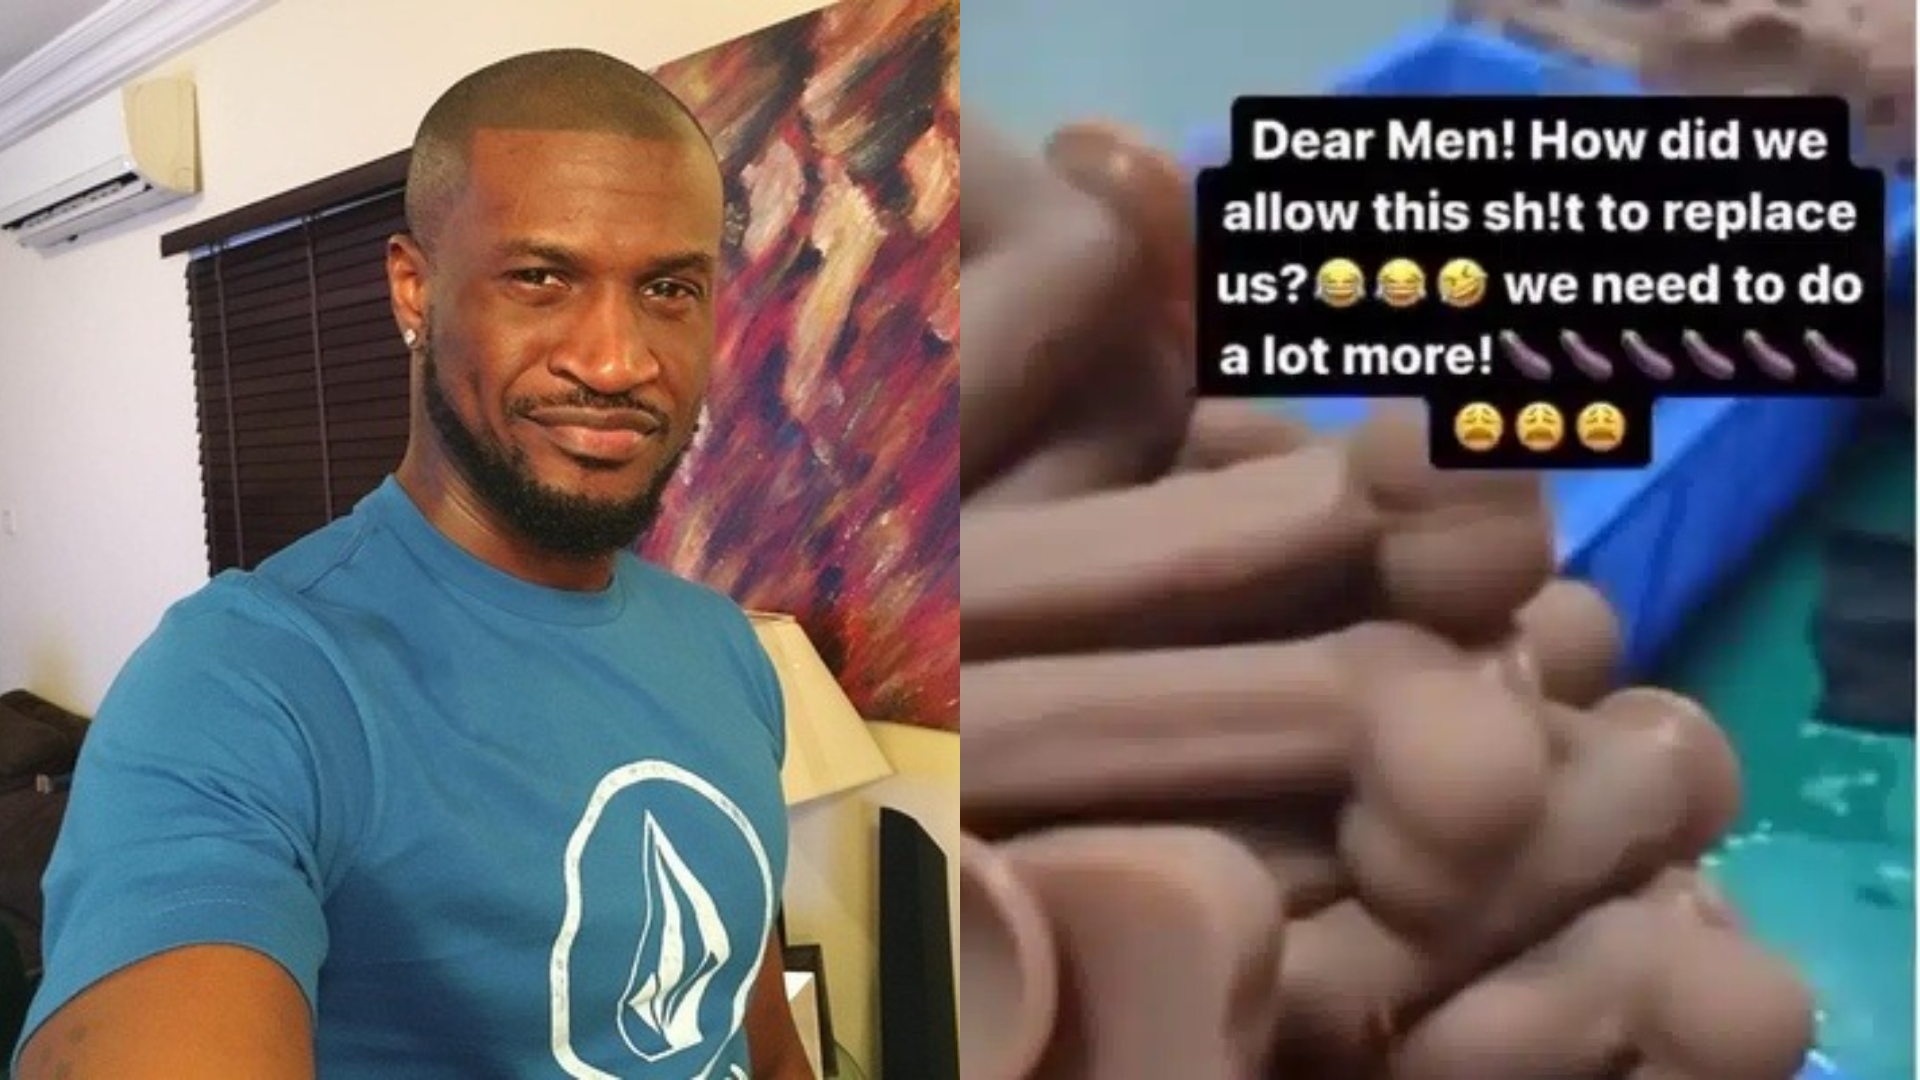 “Men, we need to do a lot more” – Peter Okoye reacts to video of dildo company